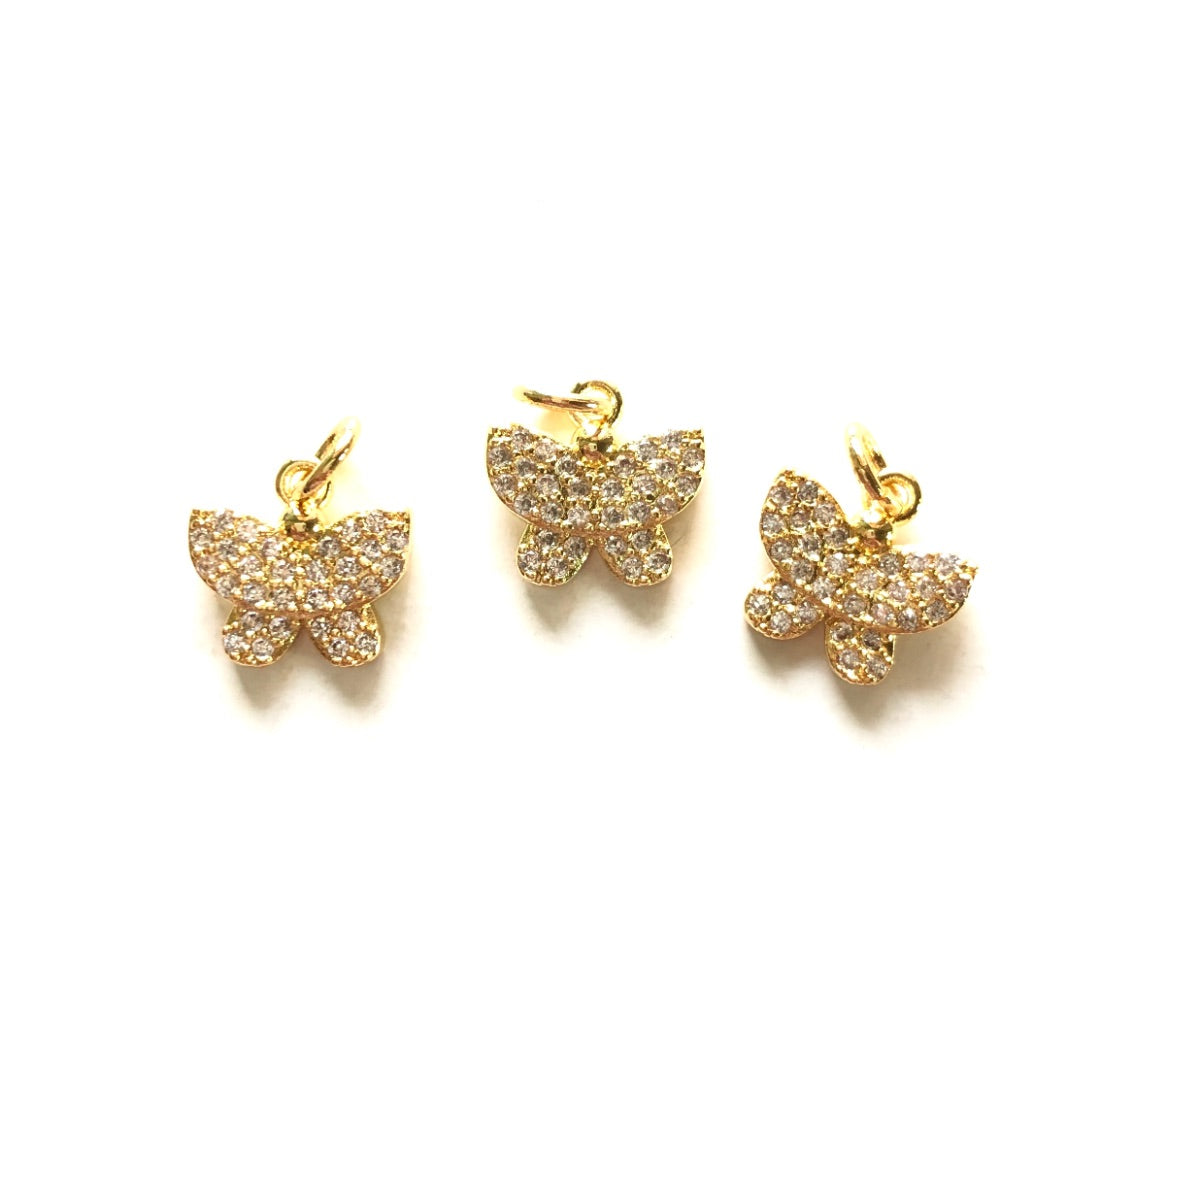 10pcs/lot 10.8*10.3mm Small Size CZ Pave Butterfly Charms Gold CZ Paved Charms Butterflies Small Sizes Charms Beads Beyond